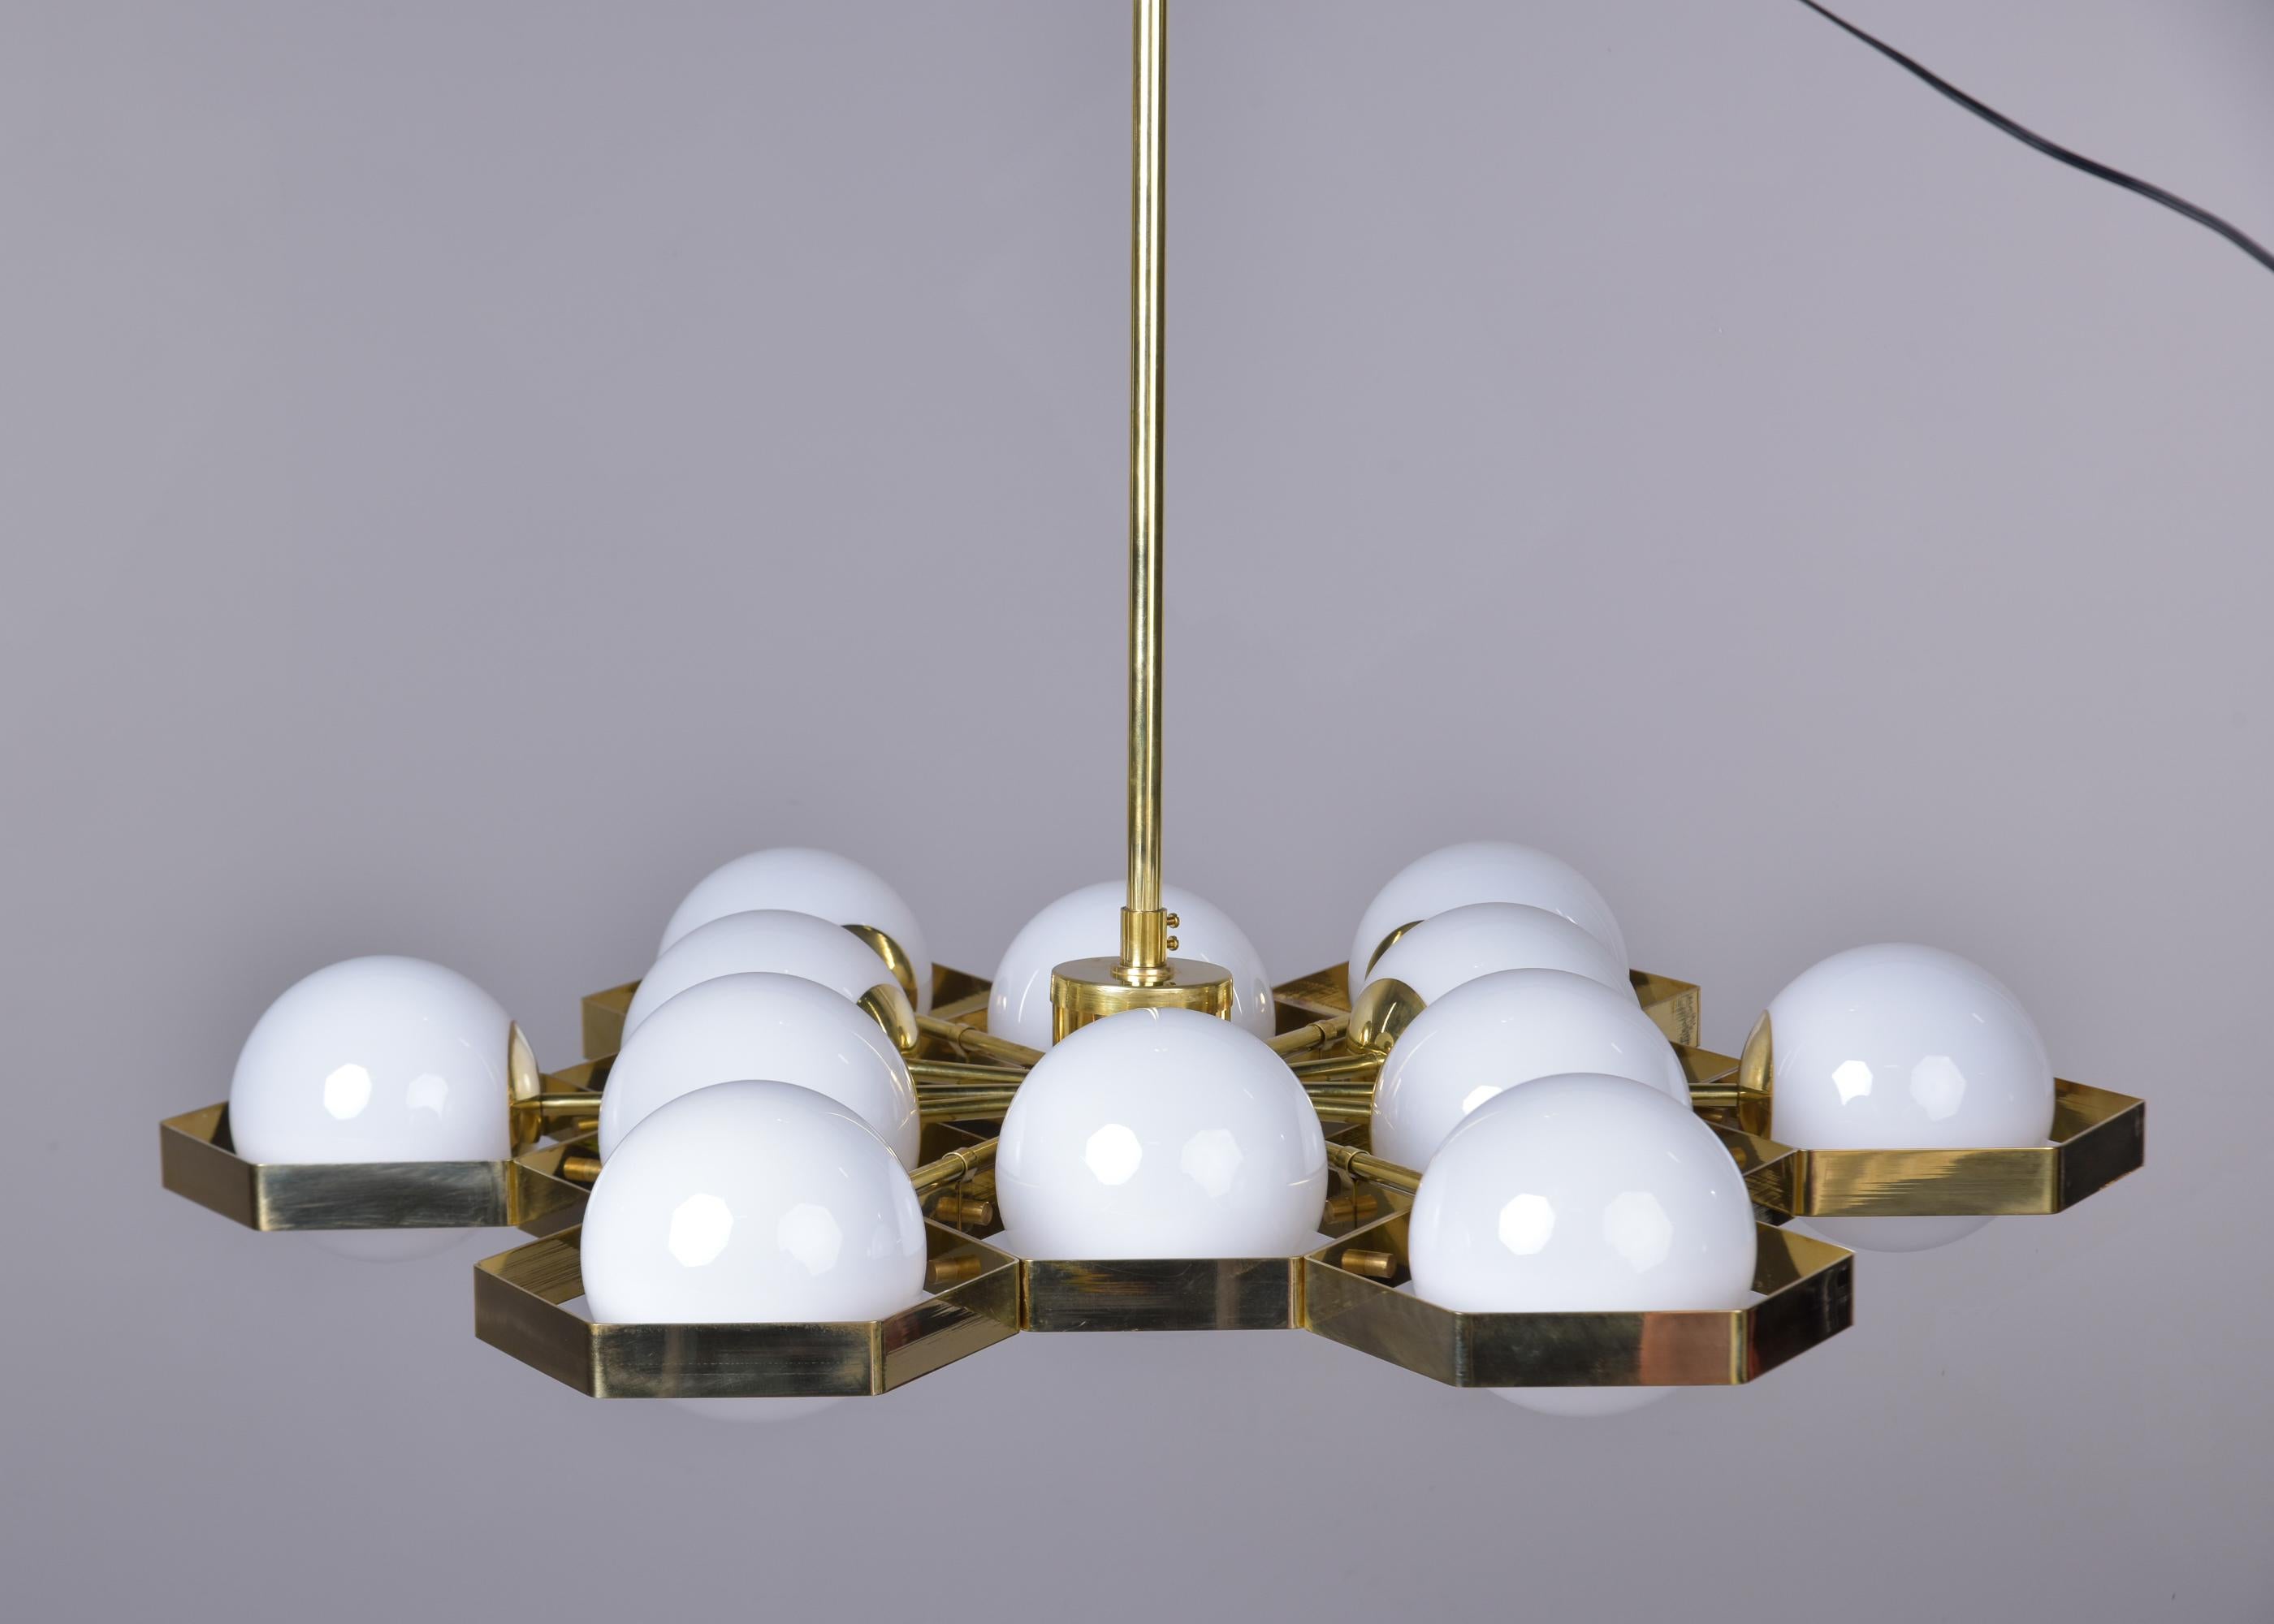 New 12 Light Italian Fixture with Honeycomb Brass Frame and White Globes  5